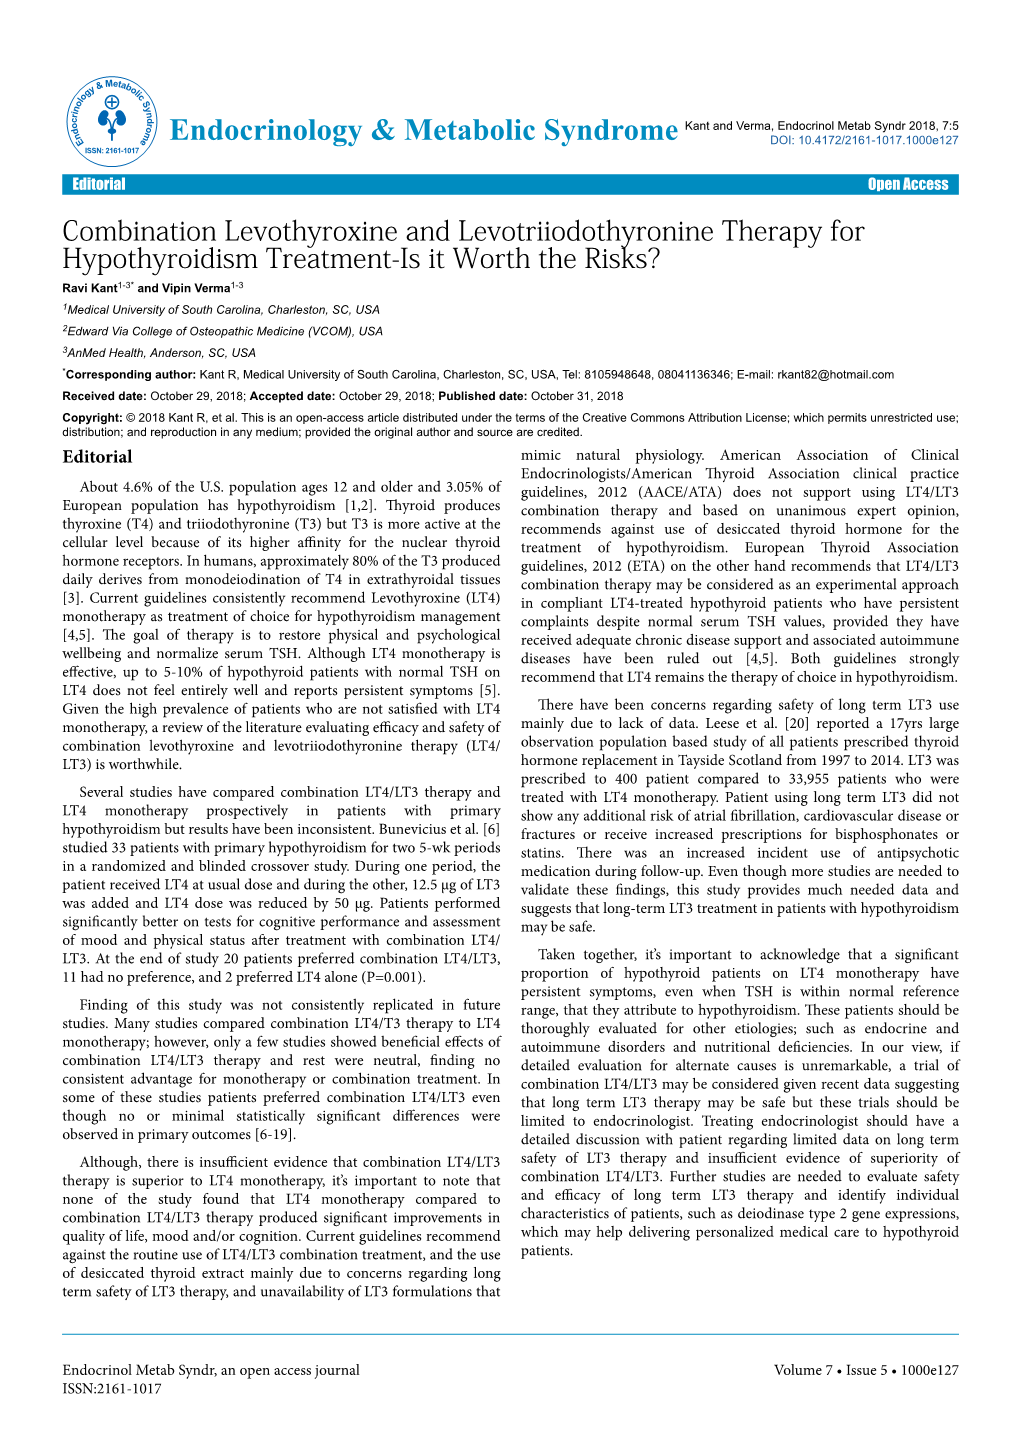 Combination Levothyroxine and Levotriiodothyronine Therapy for Hypothyroidism Treatment-Is It Worth the Risks?